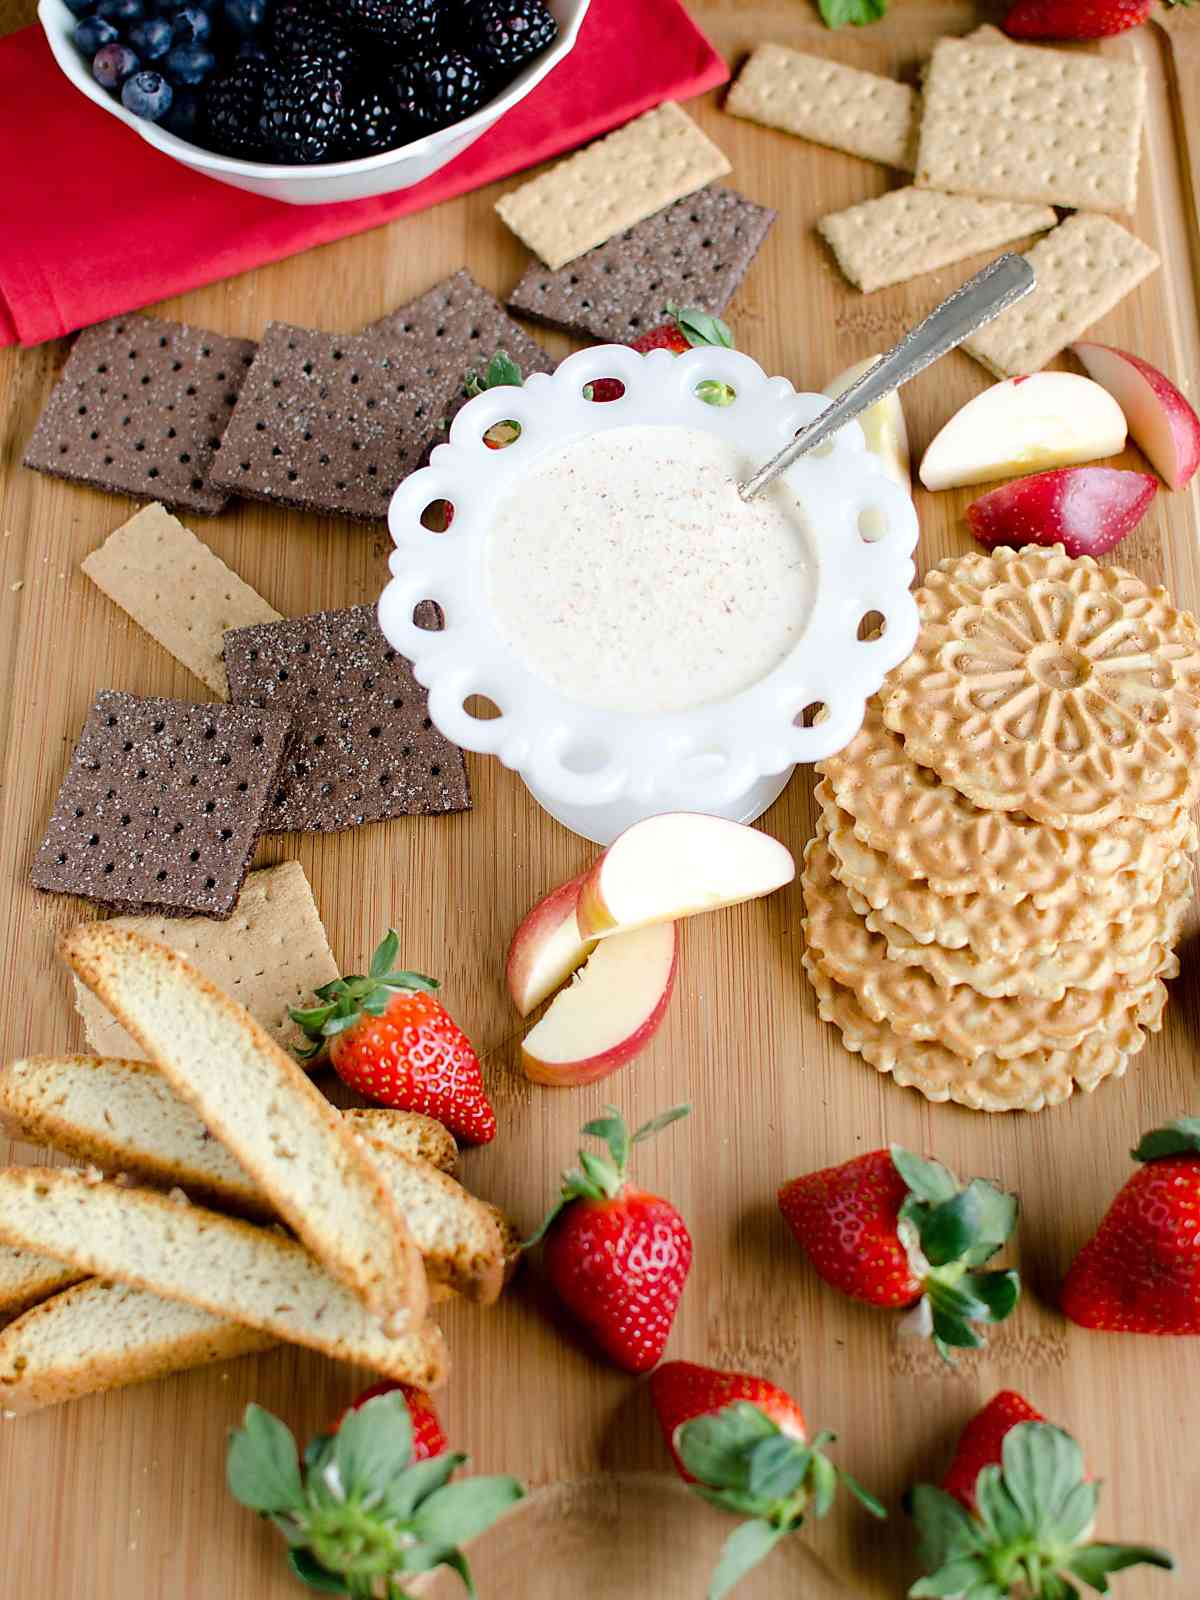 Platter of biscotti, chocolate and plain graham crackers, apples and fruit with a bowl of eggnog dip.